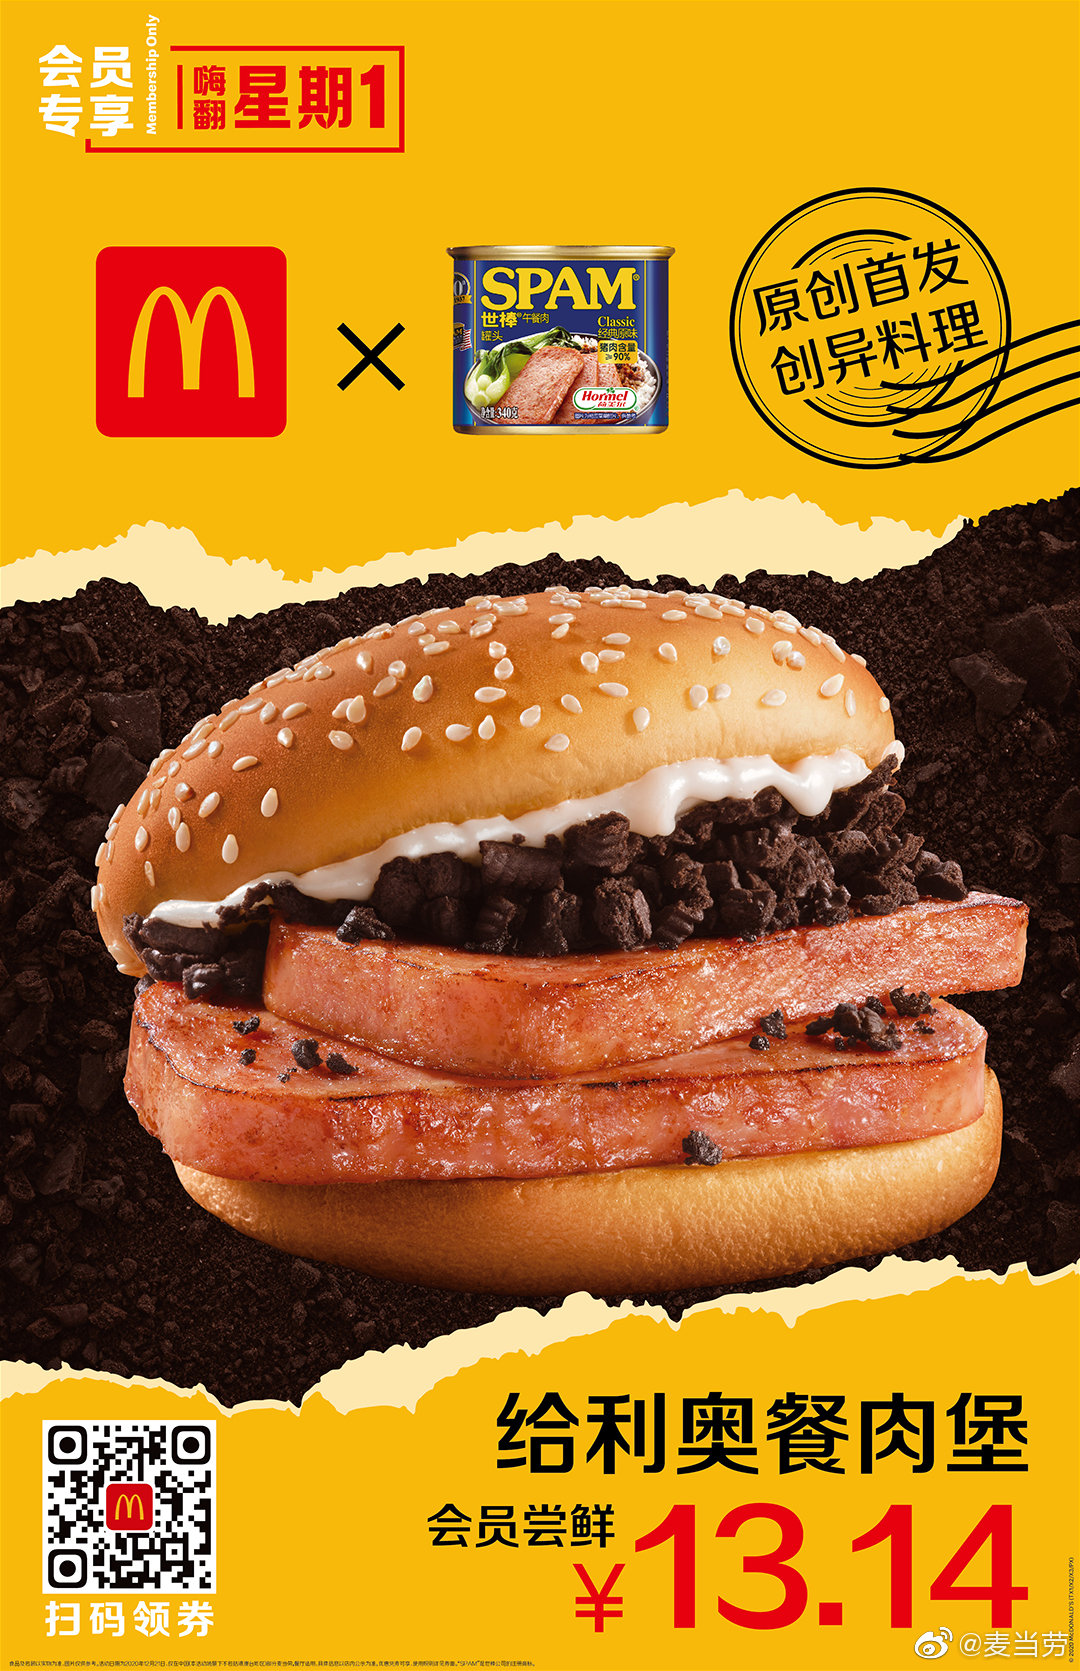 Mcdonald's china latest spam burger with oreo crumbs sparks controversy